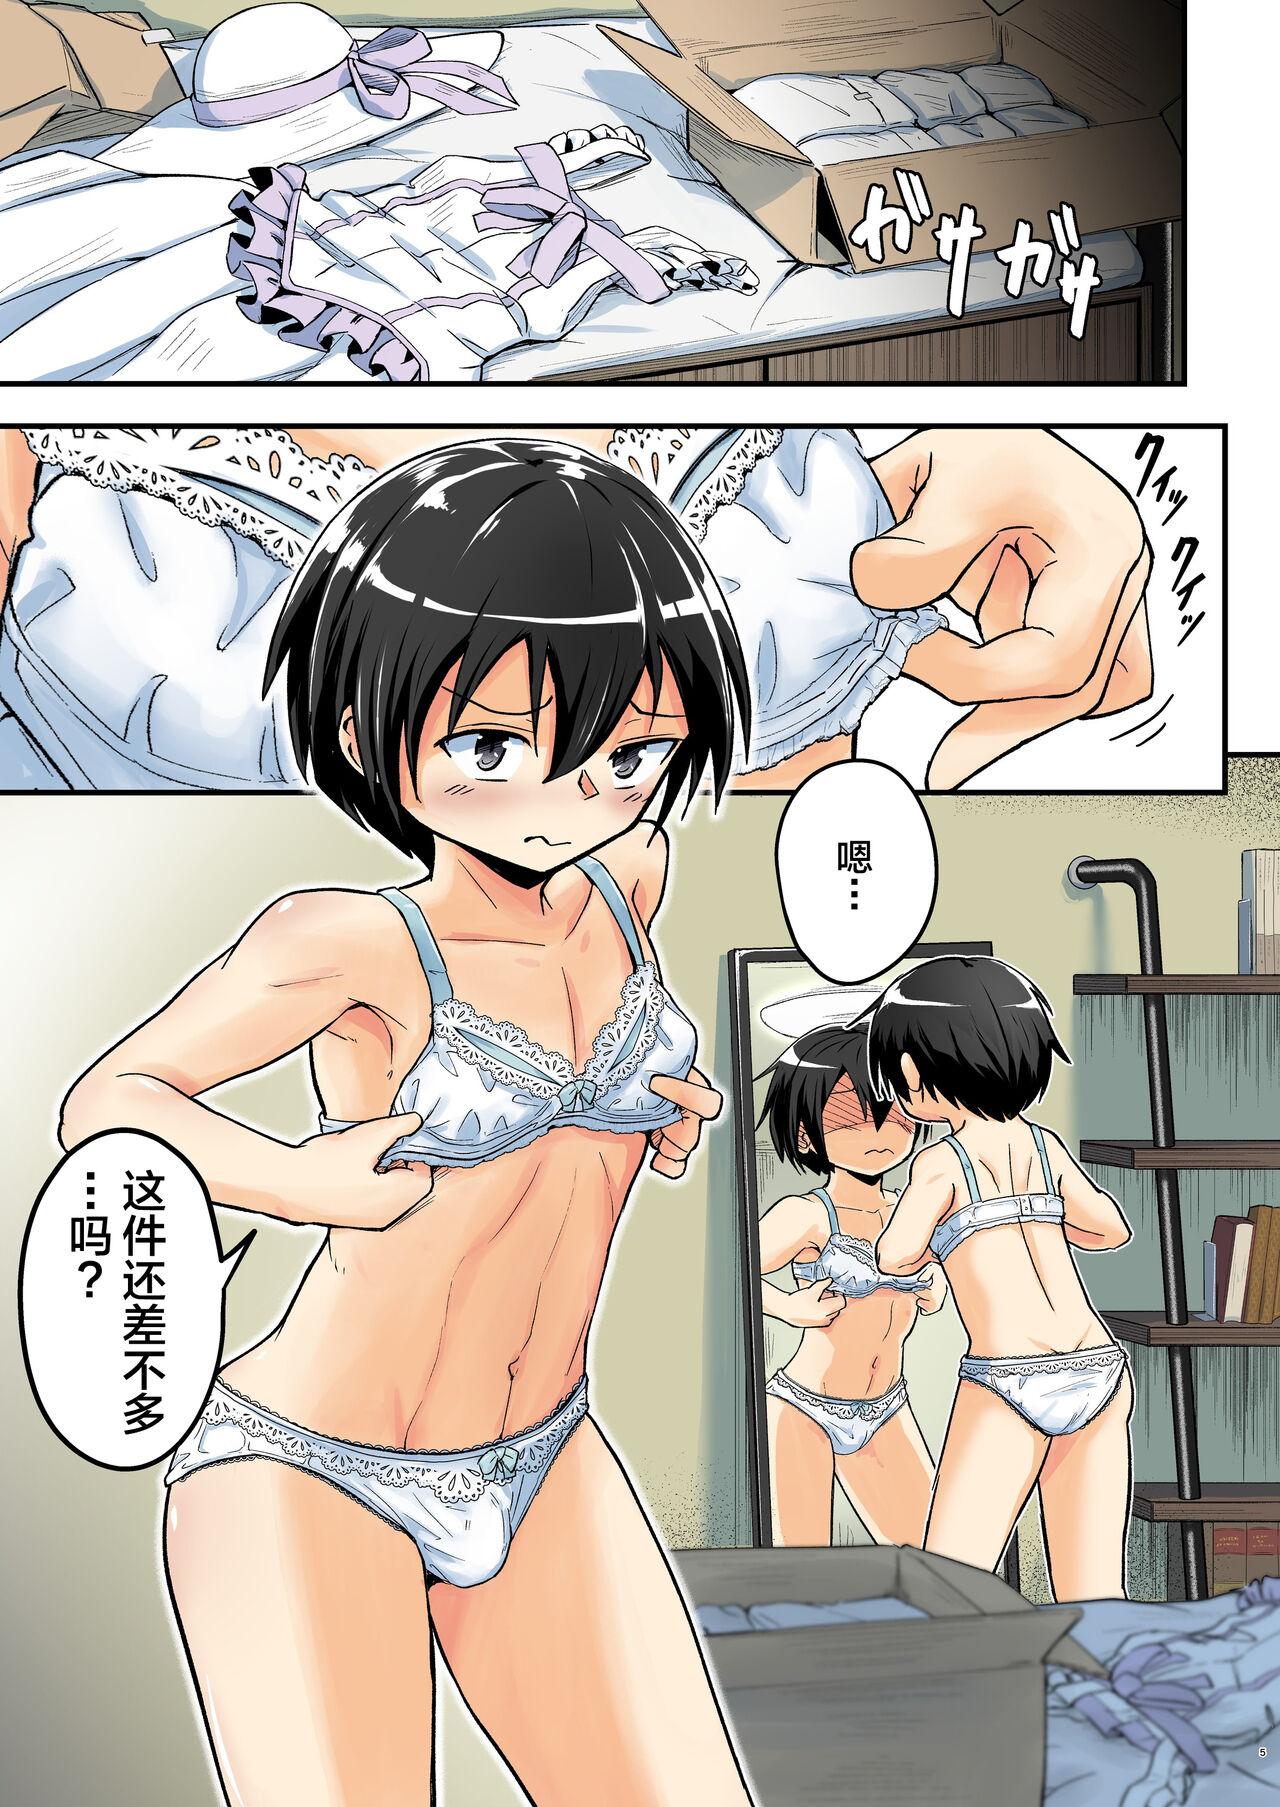 Free Fuck Clips Kiriko Route Another #07 - Sword art online Gay Smoking - Page 5